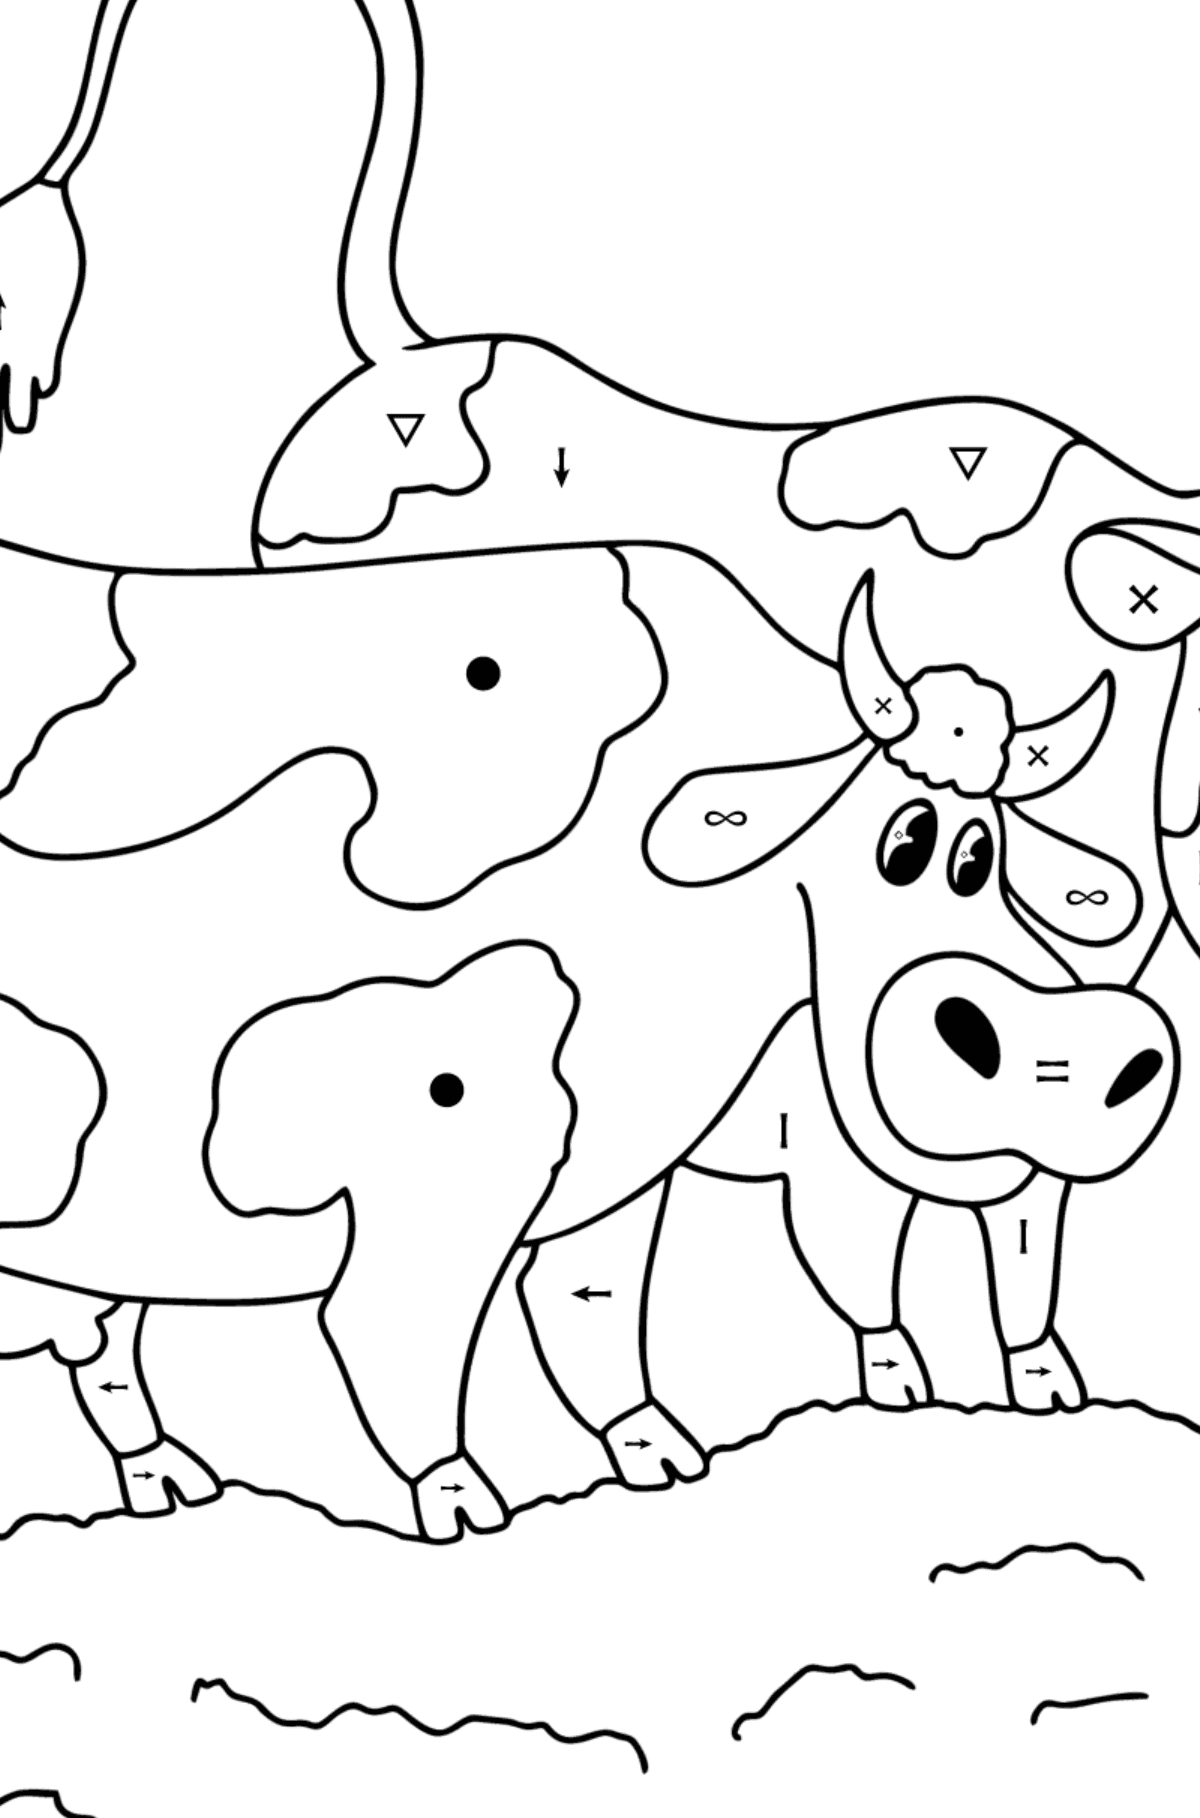 Two cows in the meadow Coloring page - Coloring by Symbols for Kids